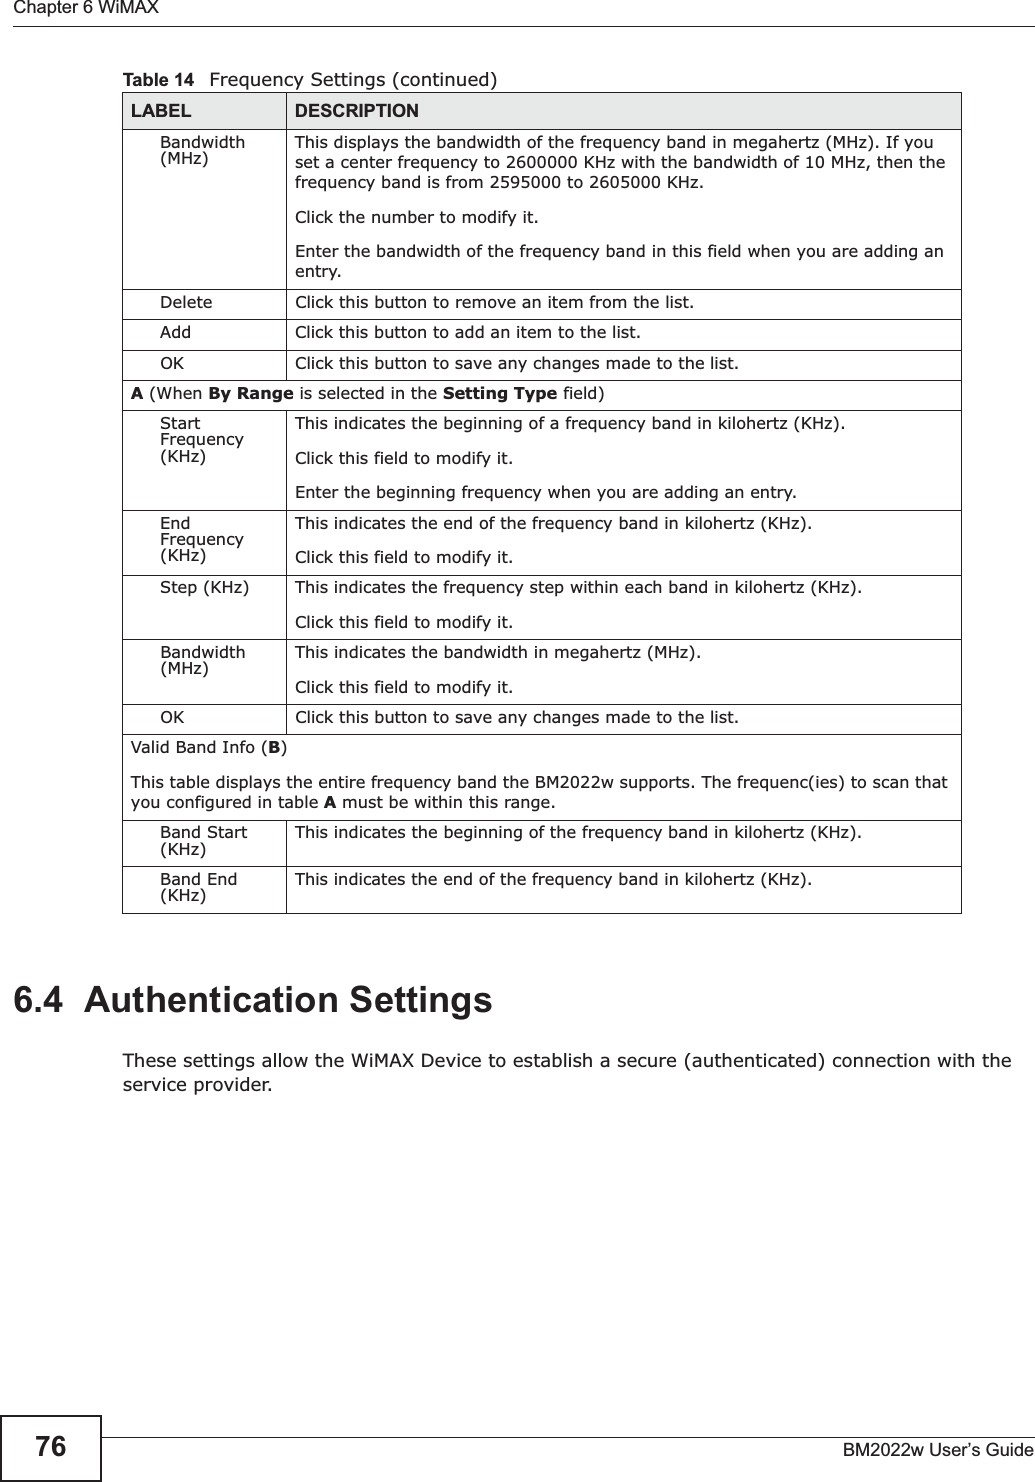 Chapter 6 WiMAXBM2022w User’s Guide766.4  Authentication SettingsThese settings allow the WiMAX Device to establish a secure (authenticated) connection with the service provider.Bandwidth (MHz) This displays the bandwidth of the frequency band in megahertz (MHz). If you set a center frequency to 2600000 KHz with the bandwidth of 10 MHz, then the frequency band is from 2595000 to 2605000 KHz.Click the number to modify it.Enter the bandwidth of the frequency band in this field when you are adding an entry.Delete Click this button to remove an item from the list.Add Click this button to add an item to the list.OK Click this button to save any changes made to the list.A (When By Range is selected in the Setting Type field)StartFrequency (KHz)This indicates the beginning of a frequency band in kilohertz (KHz).Click this field to modify it.Enter the beginning frequency when you are adding an entry.EndFrequency (KHz)This indicates the end of the frequency band in kilohertz (KHz).Click this field to modify it.Step (KHz) This indicates the frequency step within each band in kilohertz (KHz).Click this field to modify it.Bandwidth (MHz) This indicates the bandwidth in megahertz (MHz).Click this field to modify it.OK Click this button to save any changes made to the list.Valid Band Info (B)This table displays the entire frequency band the BM2022w supports. The frequenc(ies) to scan that you configured in table A must be within this range.Band Start (KHz) This indicates the beginning of the frequency band in kilohertz (KHz).Band End (KHz) This indicates the end of the frequency band in kilohertz (KHz).Table 14   Frequency Settings (continued)LABEL DESCRIPTION